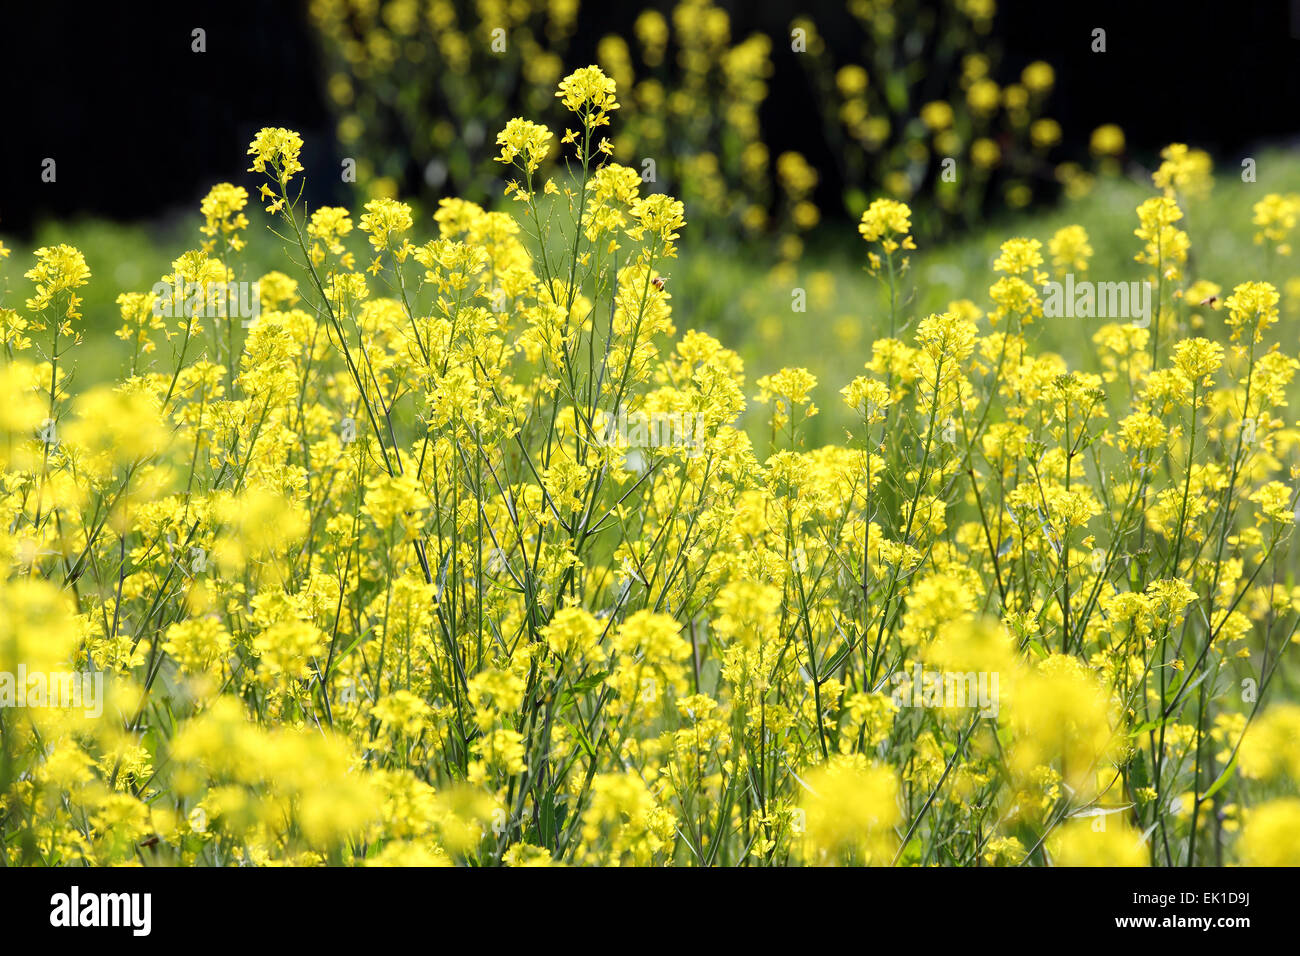 canola or rapeseed plants in the farm field Stock Photo